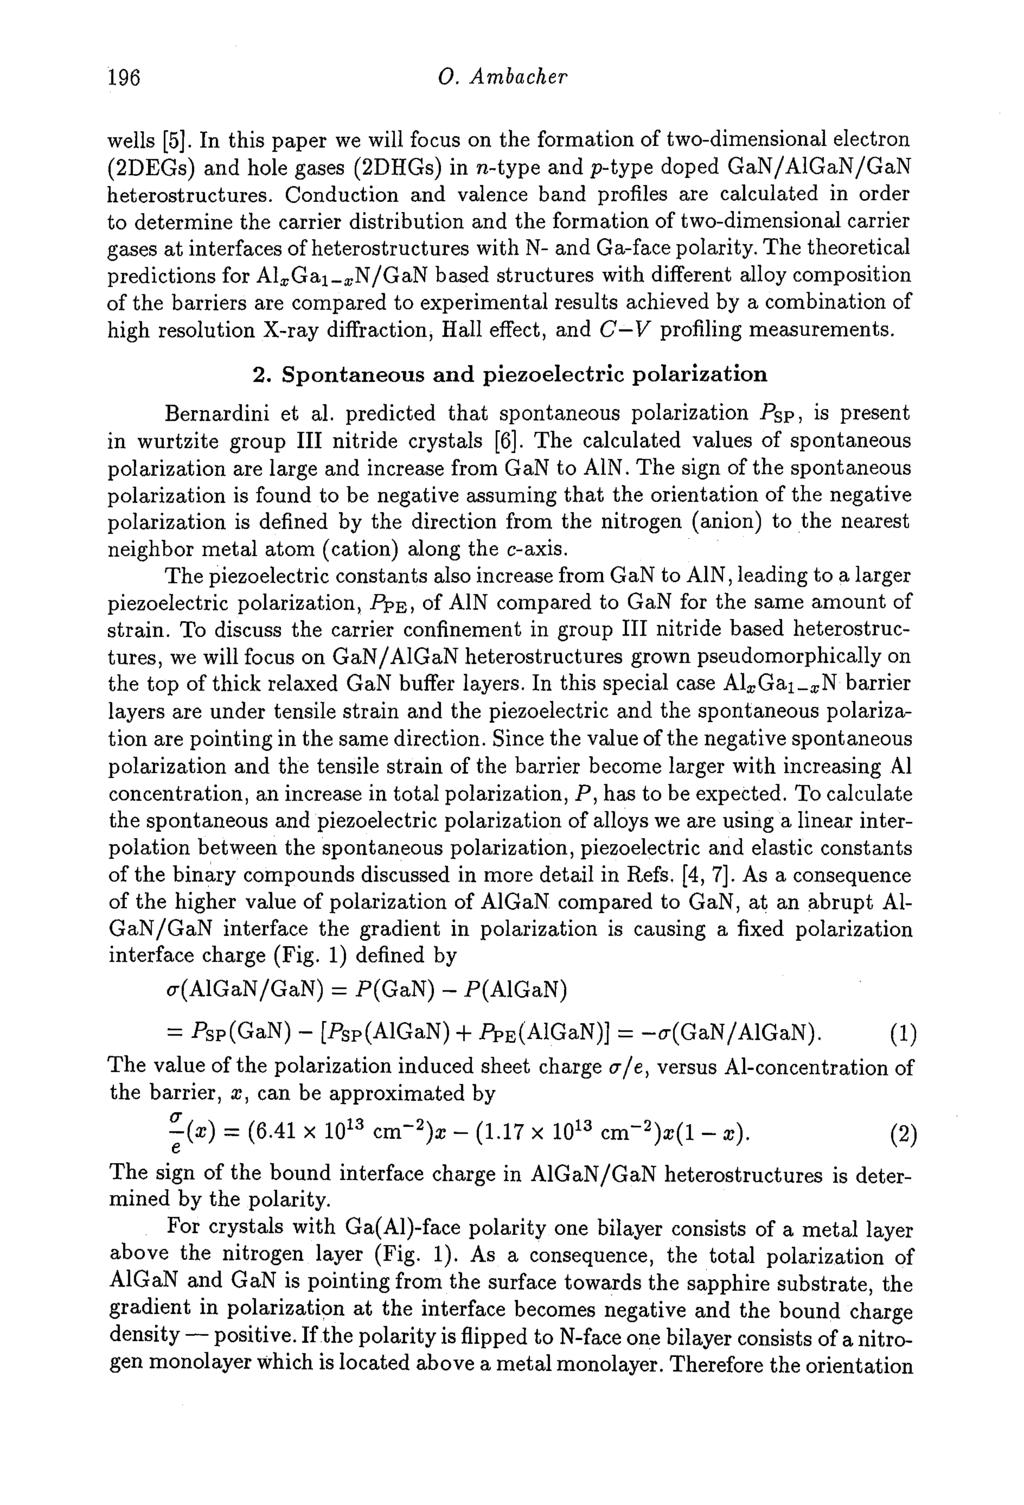 196 0. Ambacher wells [5]. In this paper we will focus on the formation of two-dimensional electron (2DEGs) and hole gases (2DHGs) in n-type and p-type doped GaN/AlGaN/GaN heterostructures.